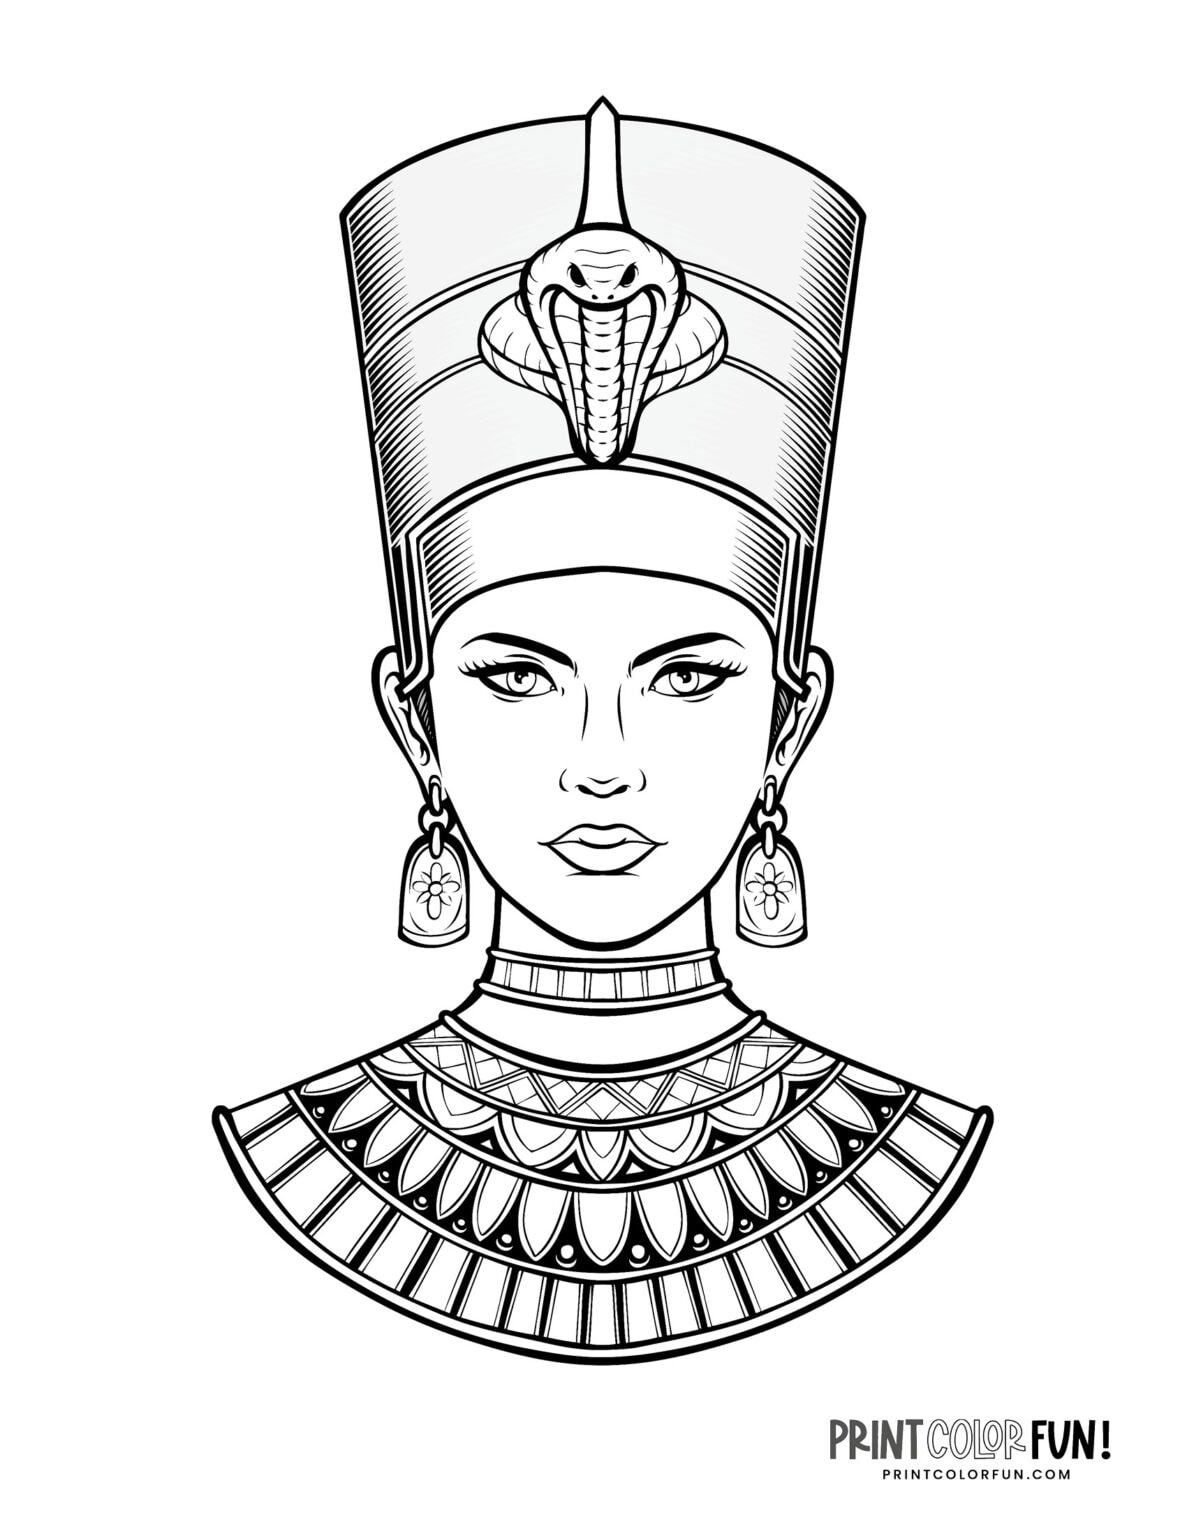 Queen Nefertiti coloring pages: Ancient Egyptian royalty, at ...